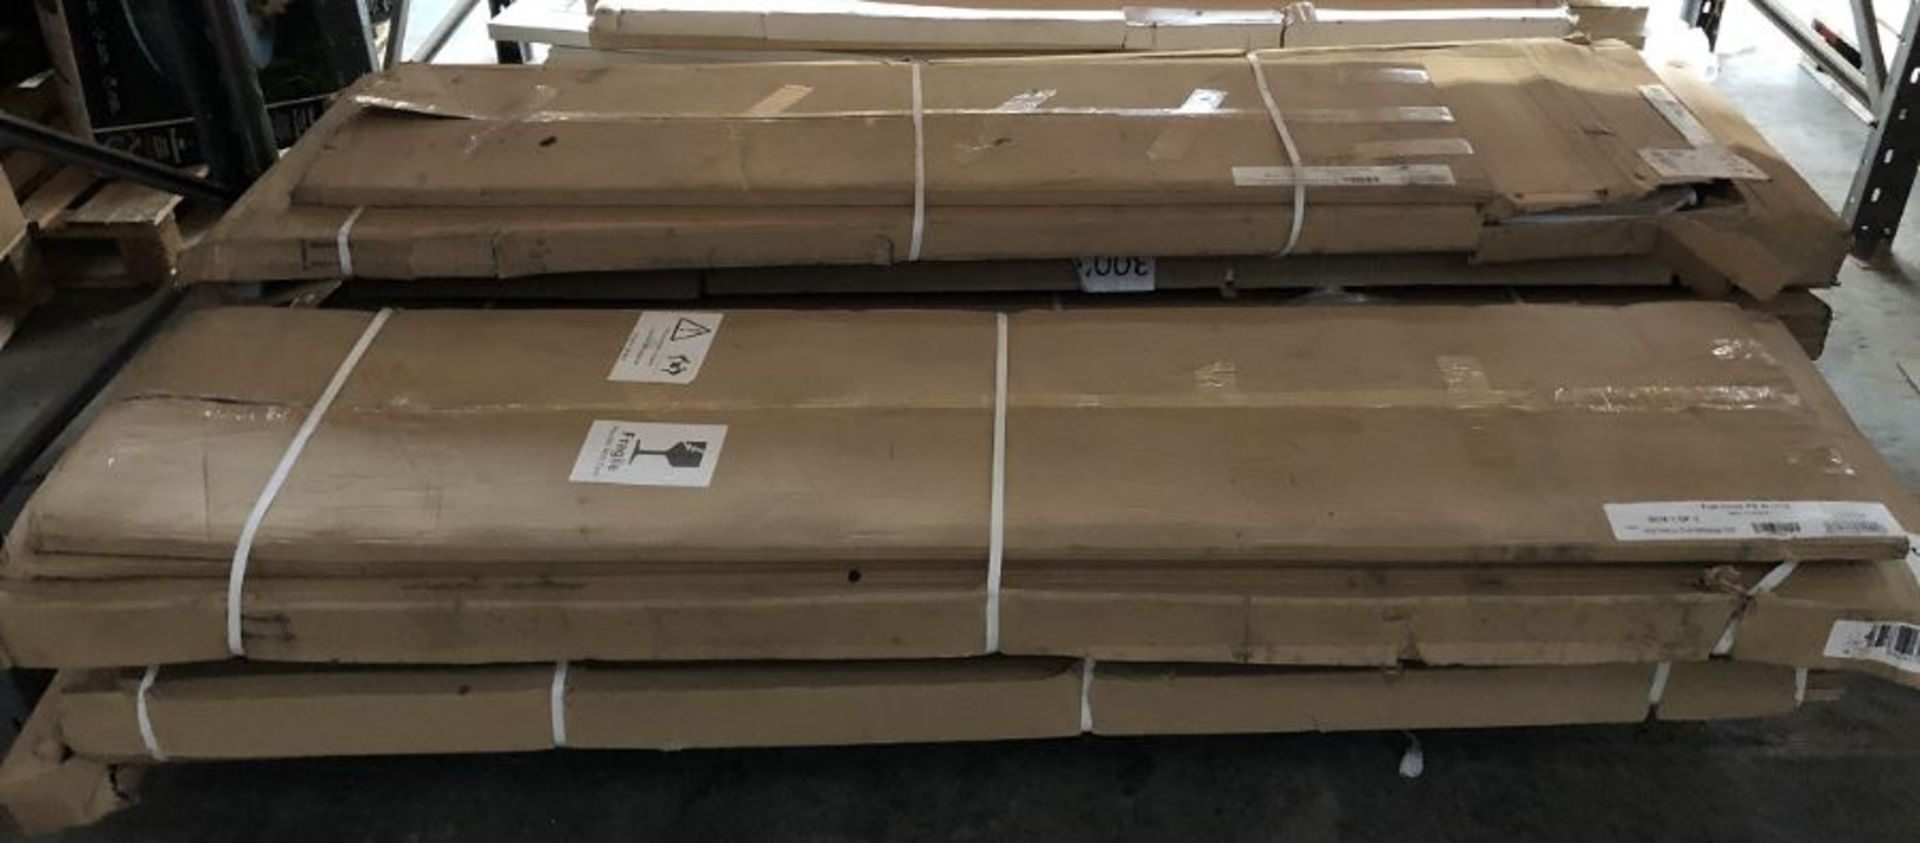 1 X BULK PALLET TO CONTAIN AN ASSORTMENT OF GRADE C/D FURNITURE AND FURNITURE PARTS / CONDITIONS MAY